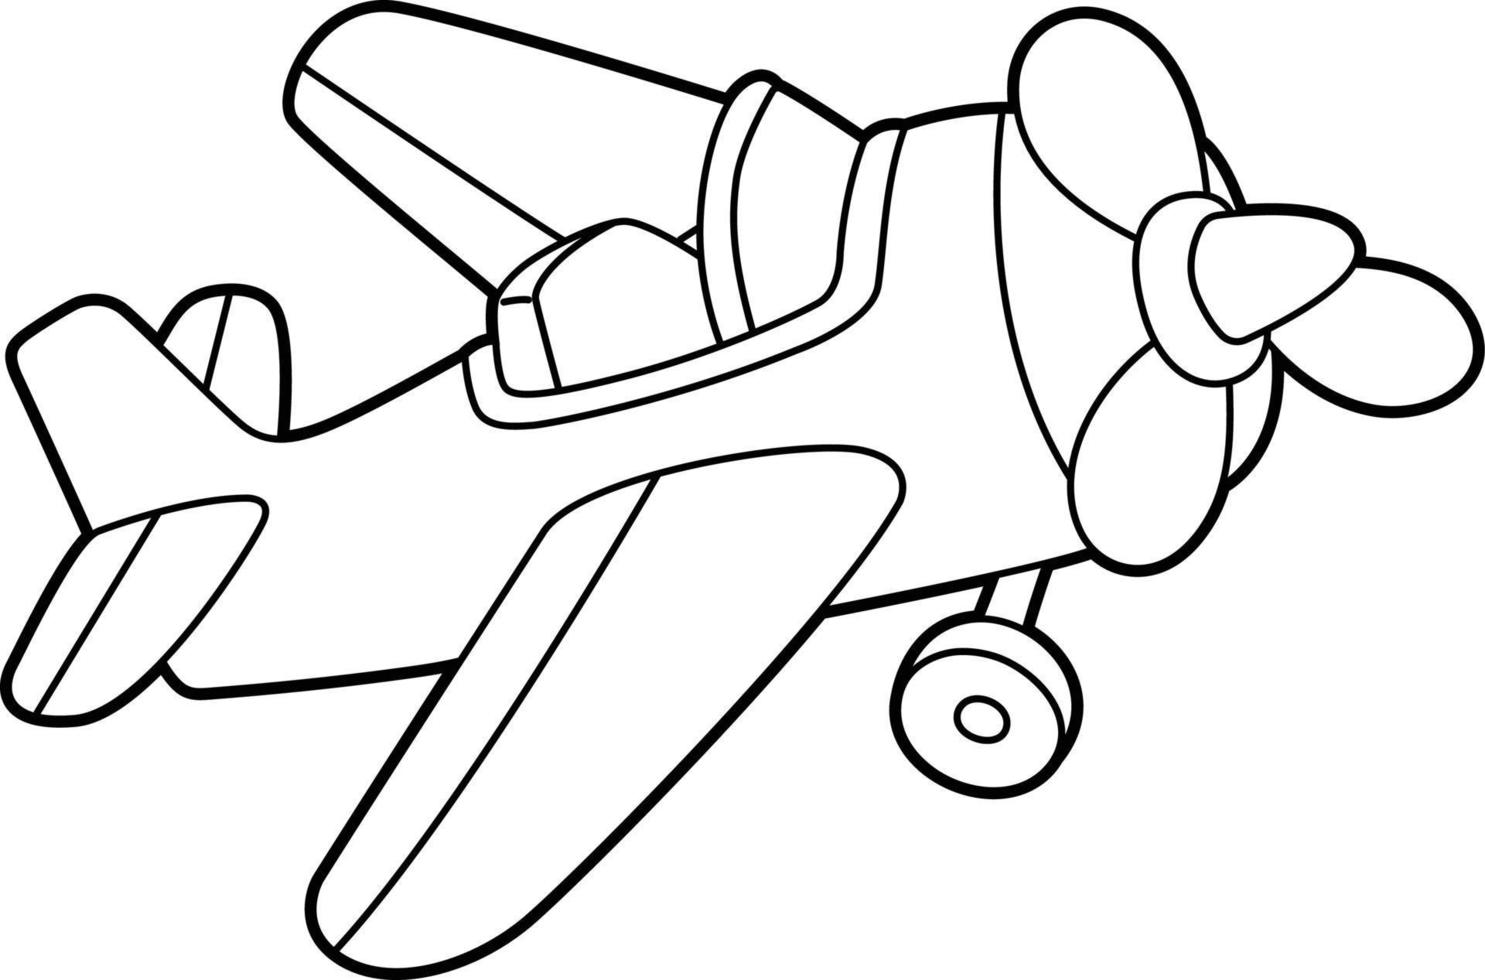 Propeller Plane Coloring Page Isolated for Kids 18 Vector Art ...